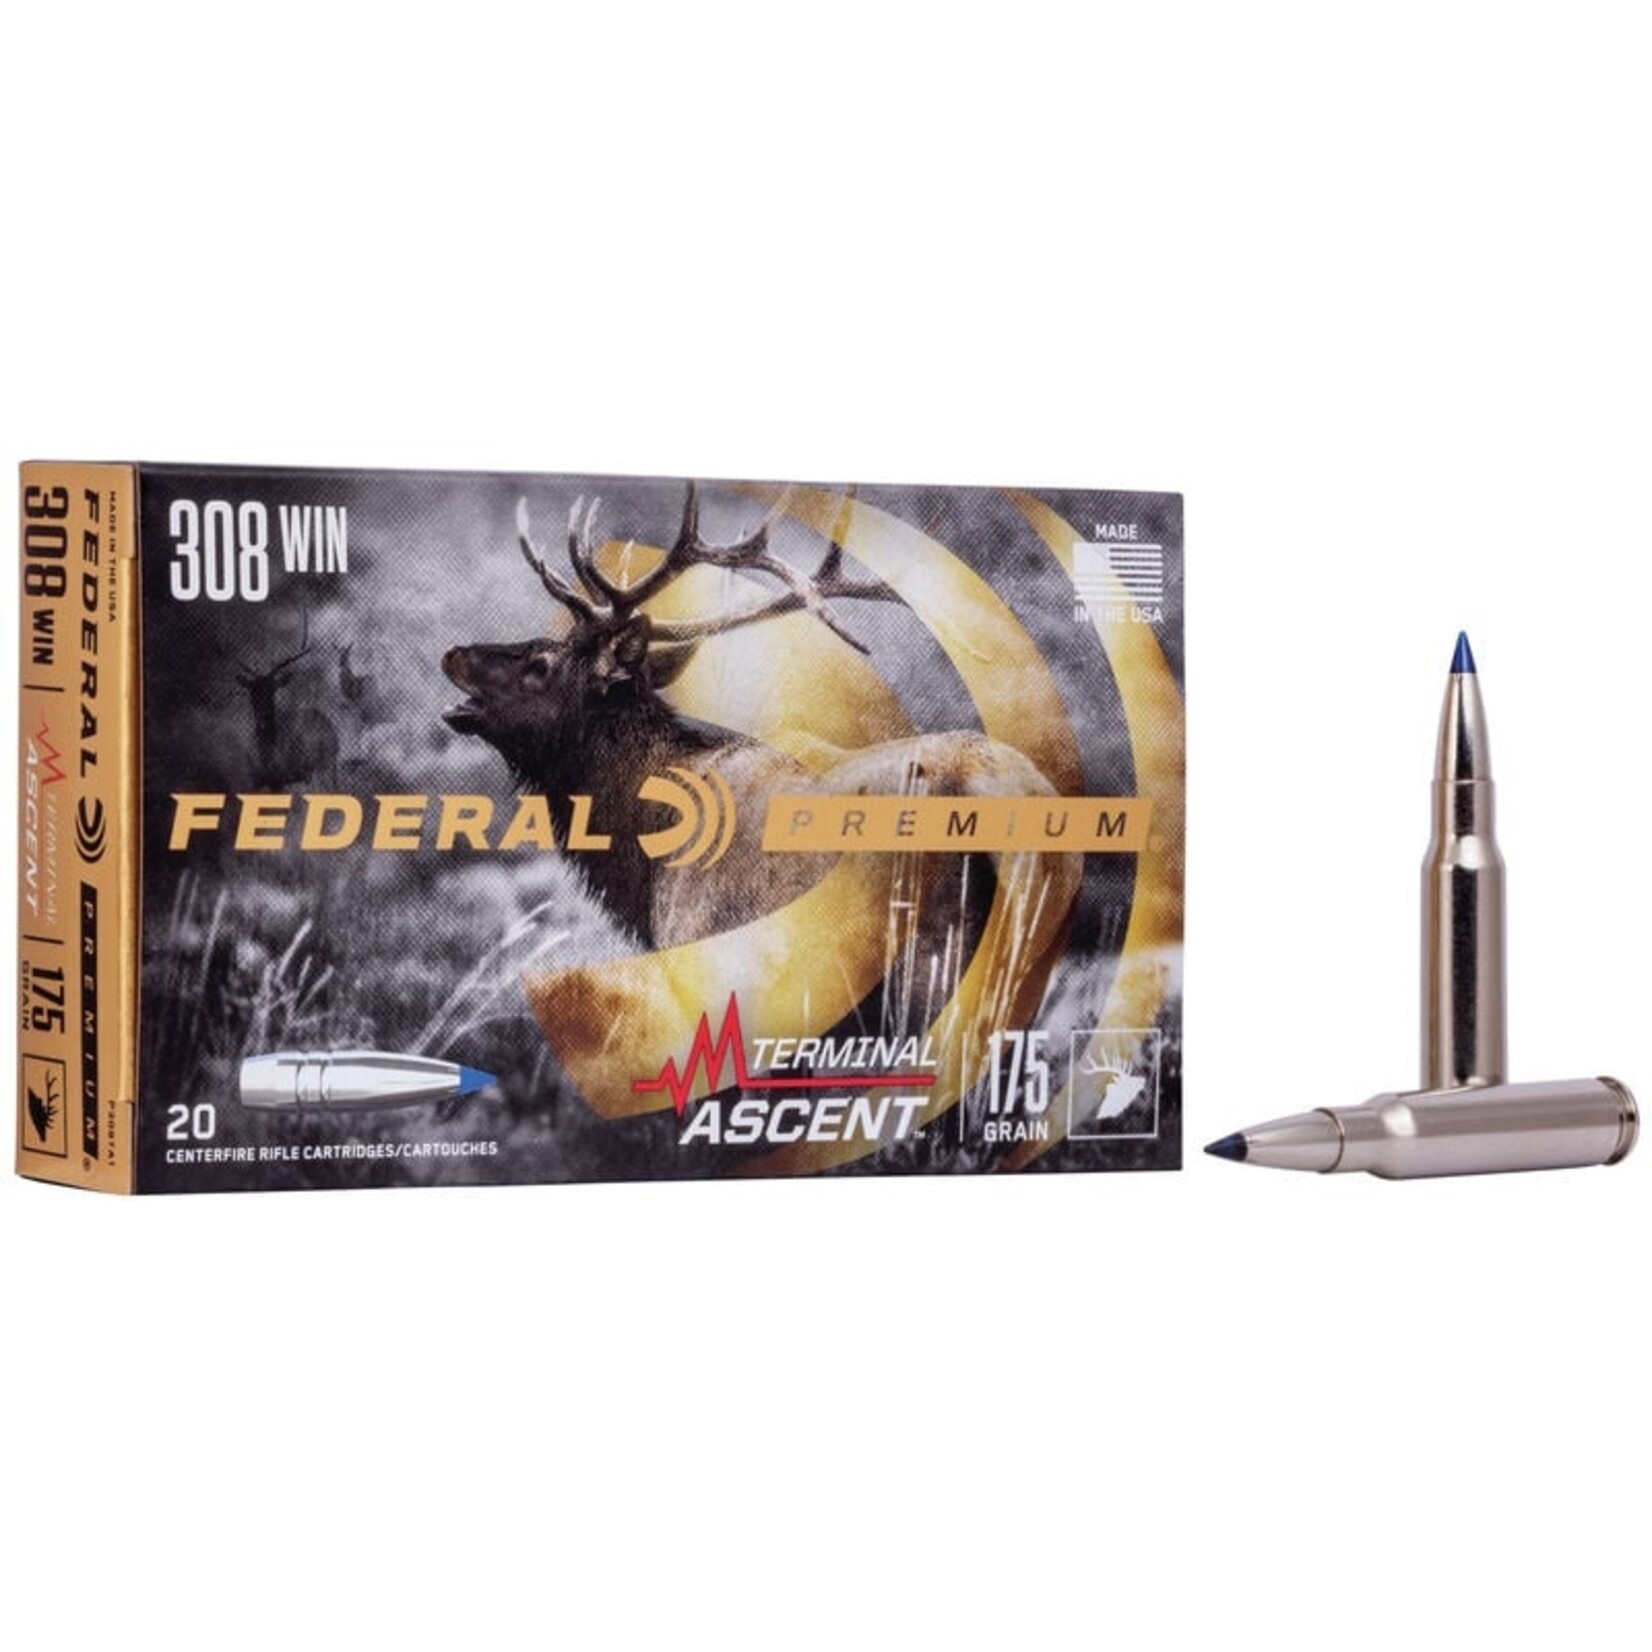 FED 308 WIN Terminal Ascent 175gr